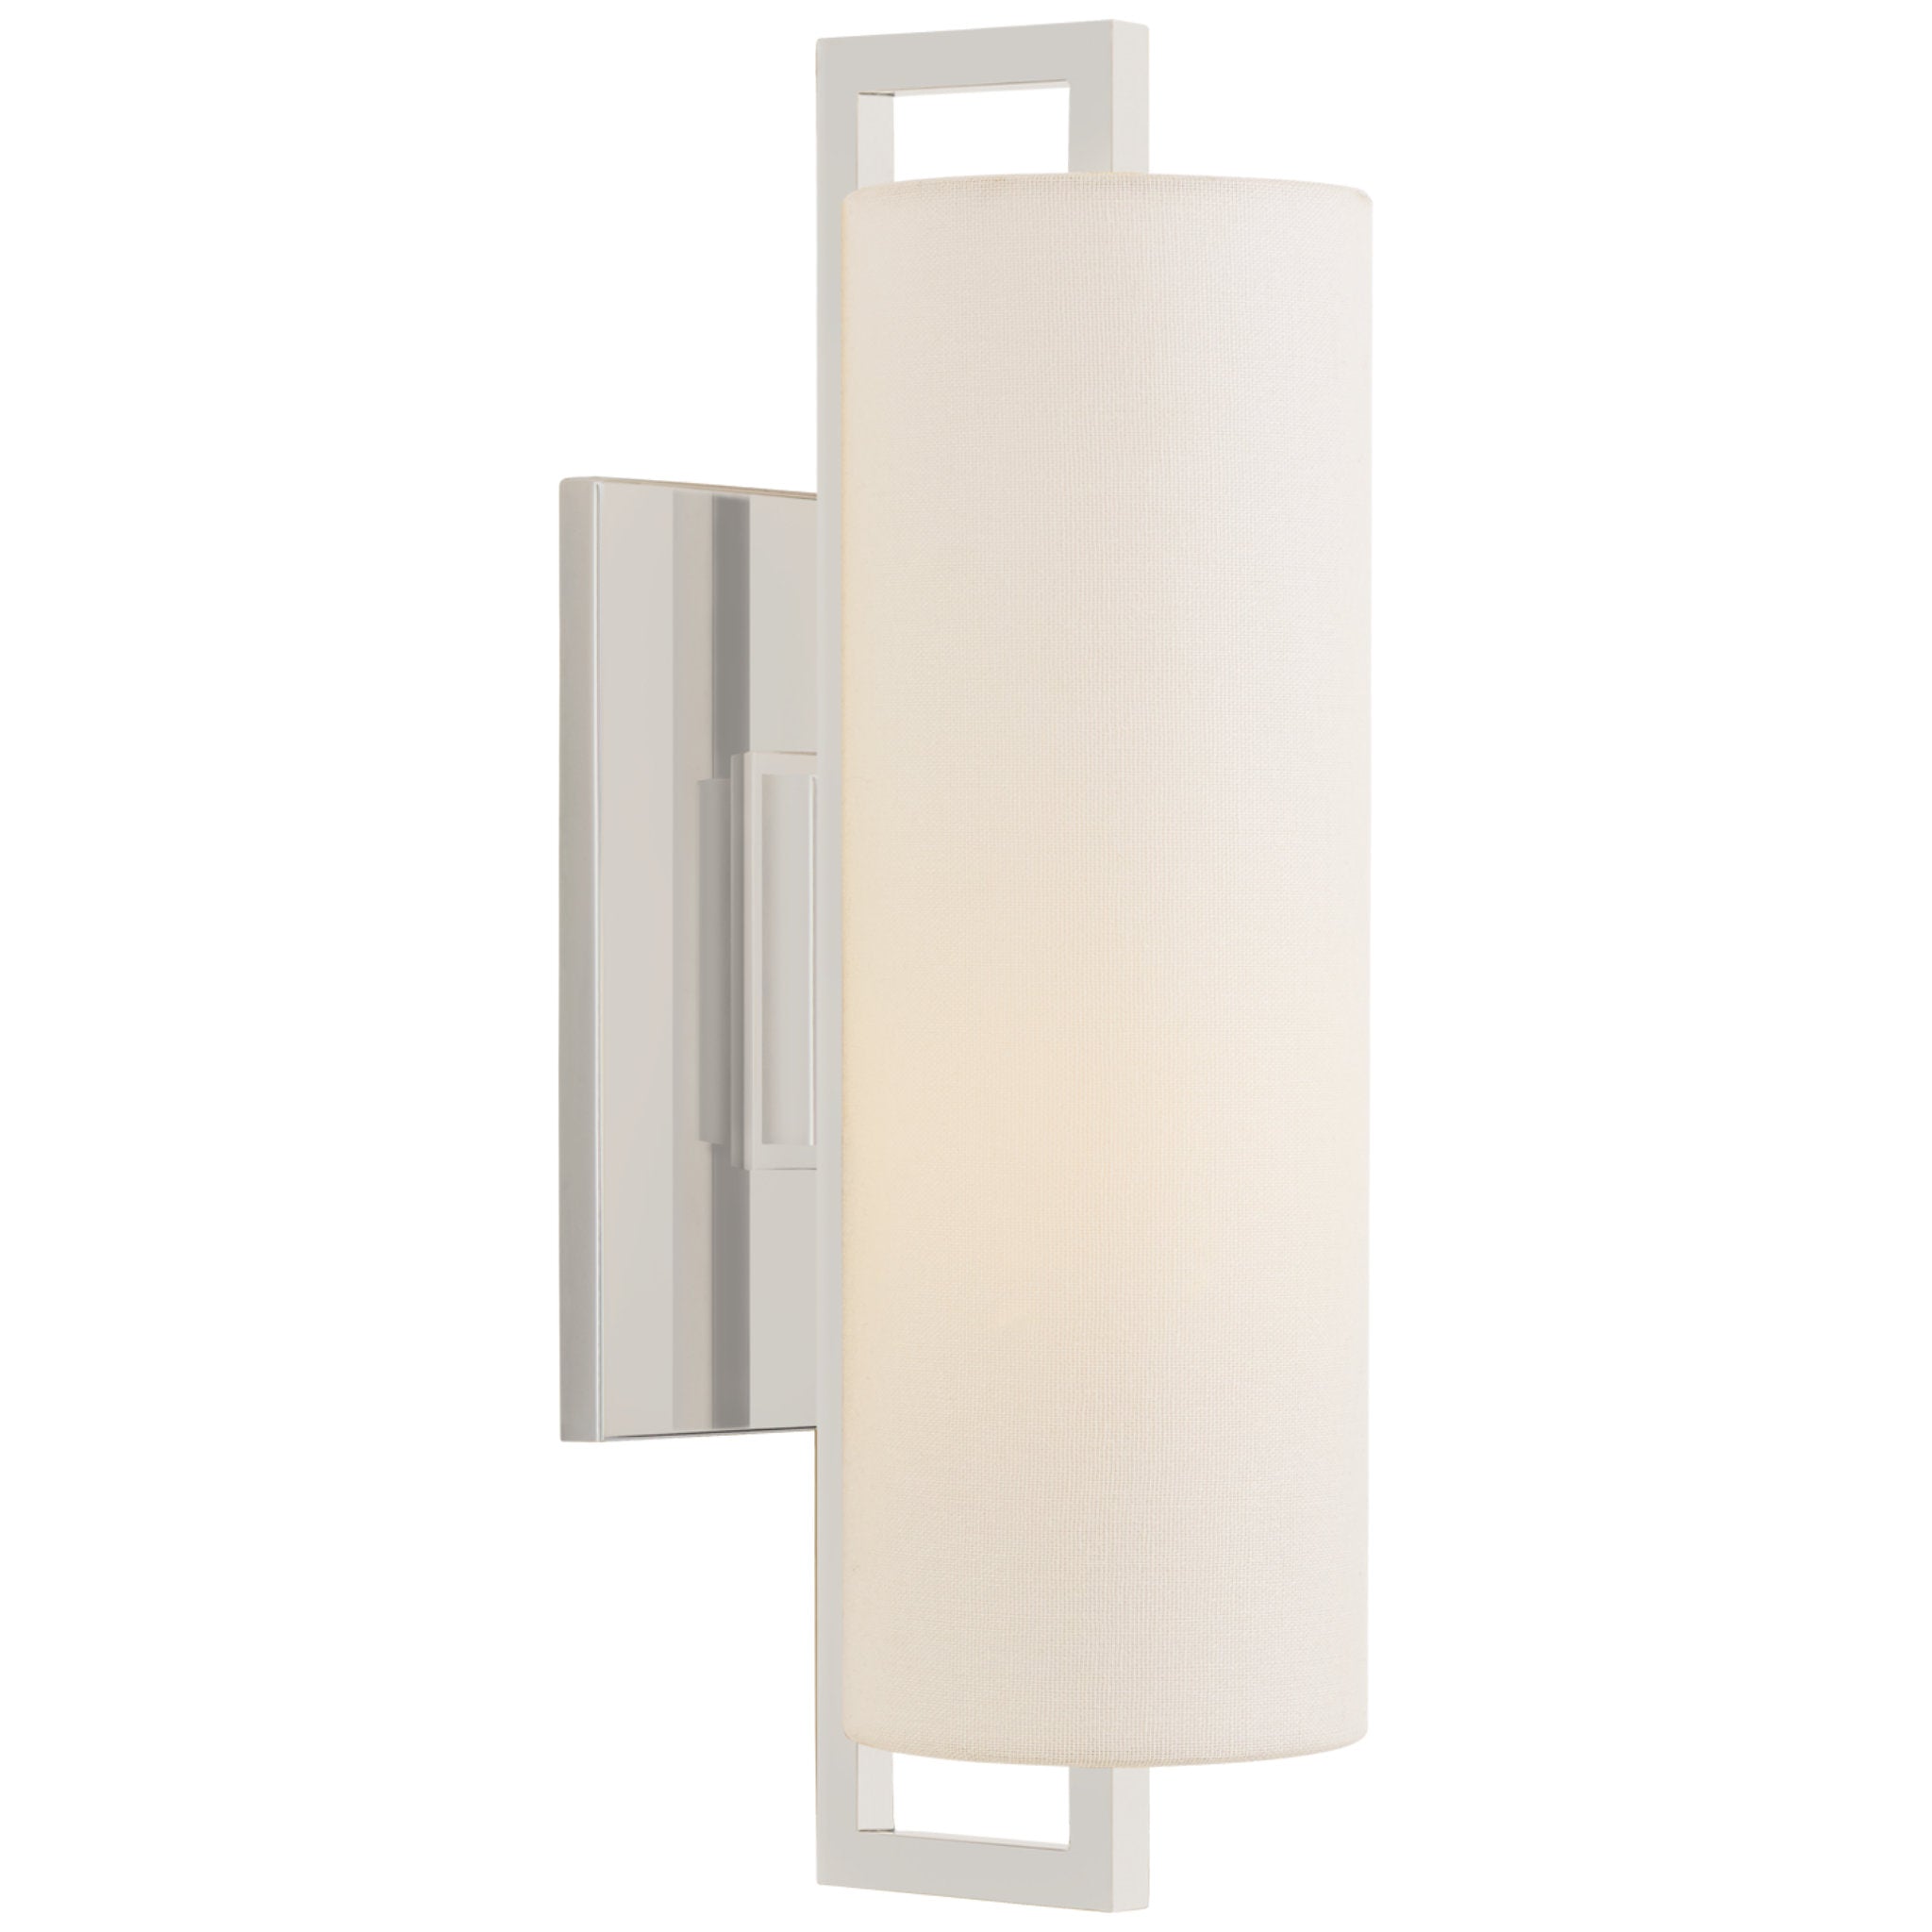 Ian K. Fowler Bowen Medium Sconce in Polished Nickel with Linen Shade